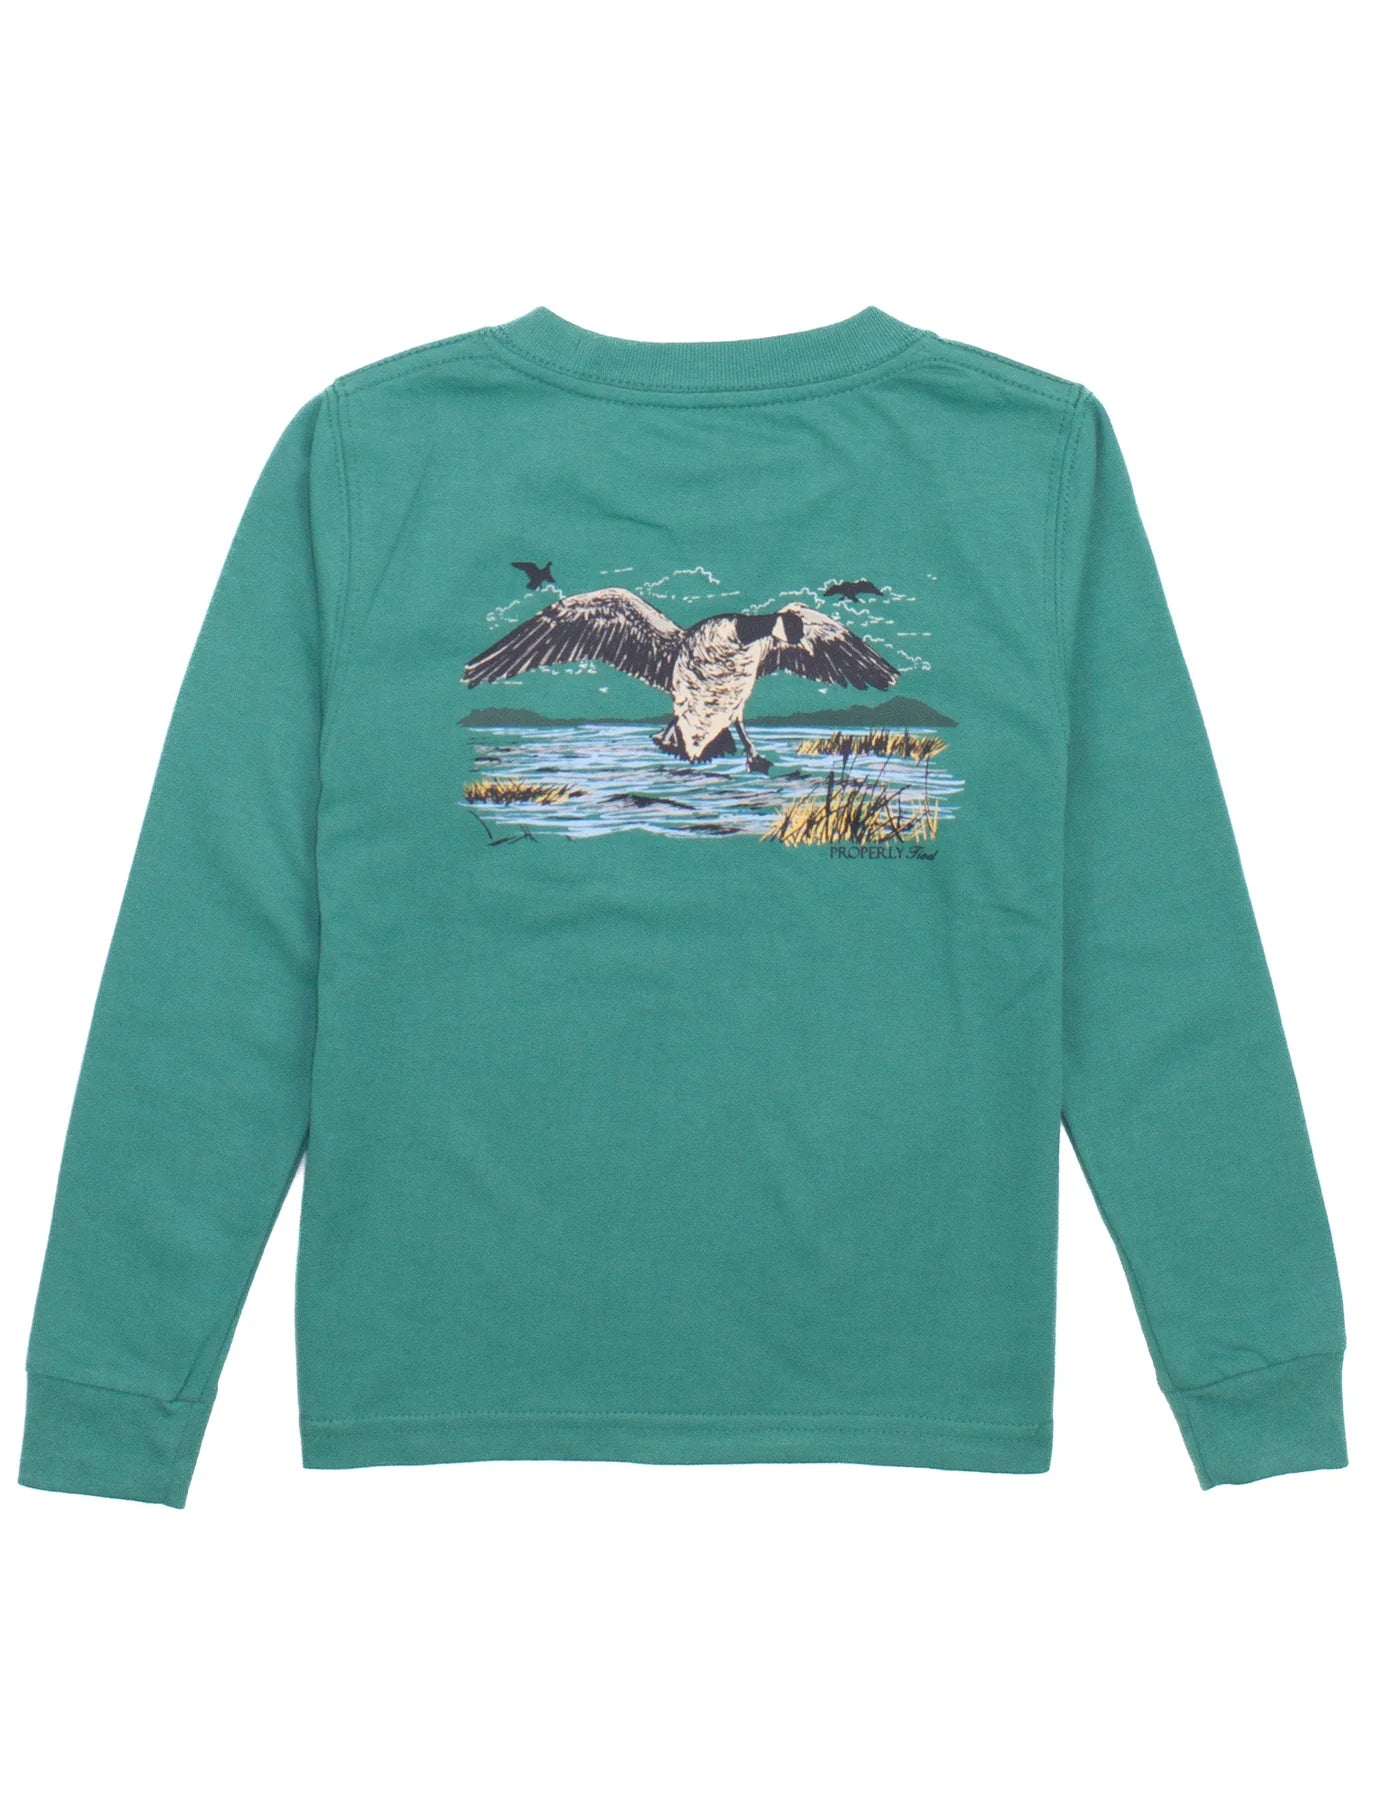 Properly Tied: Boys Geese LS Teal